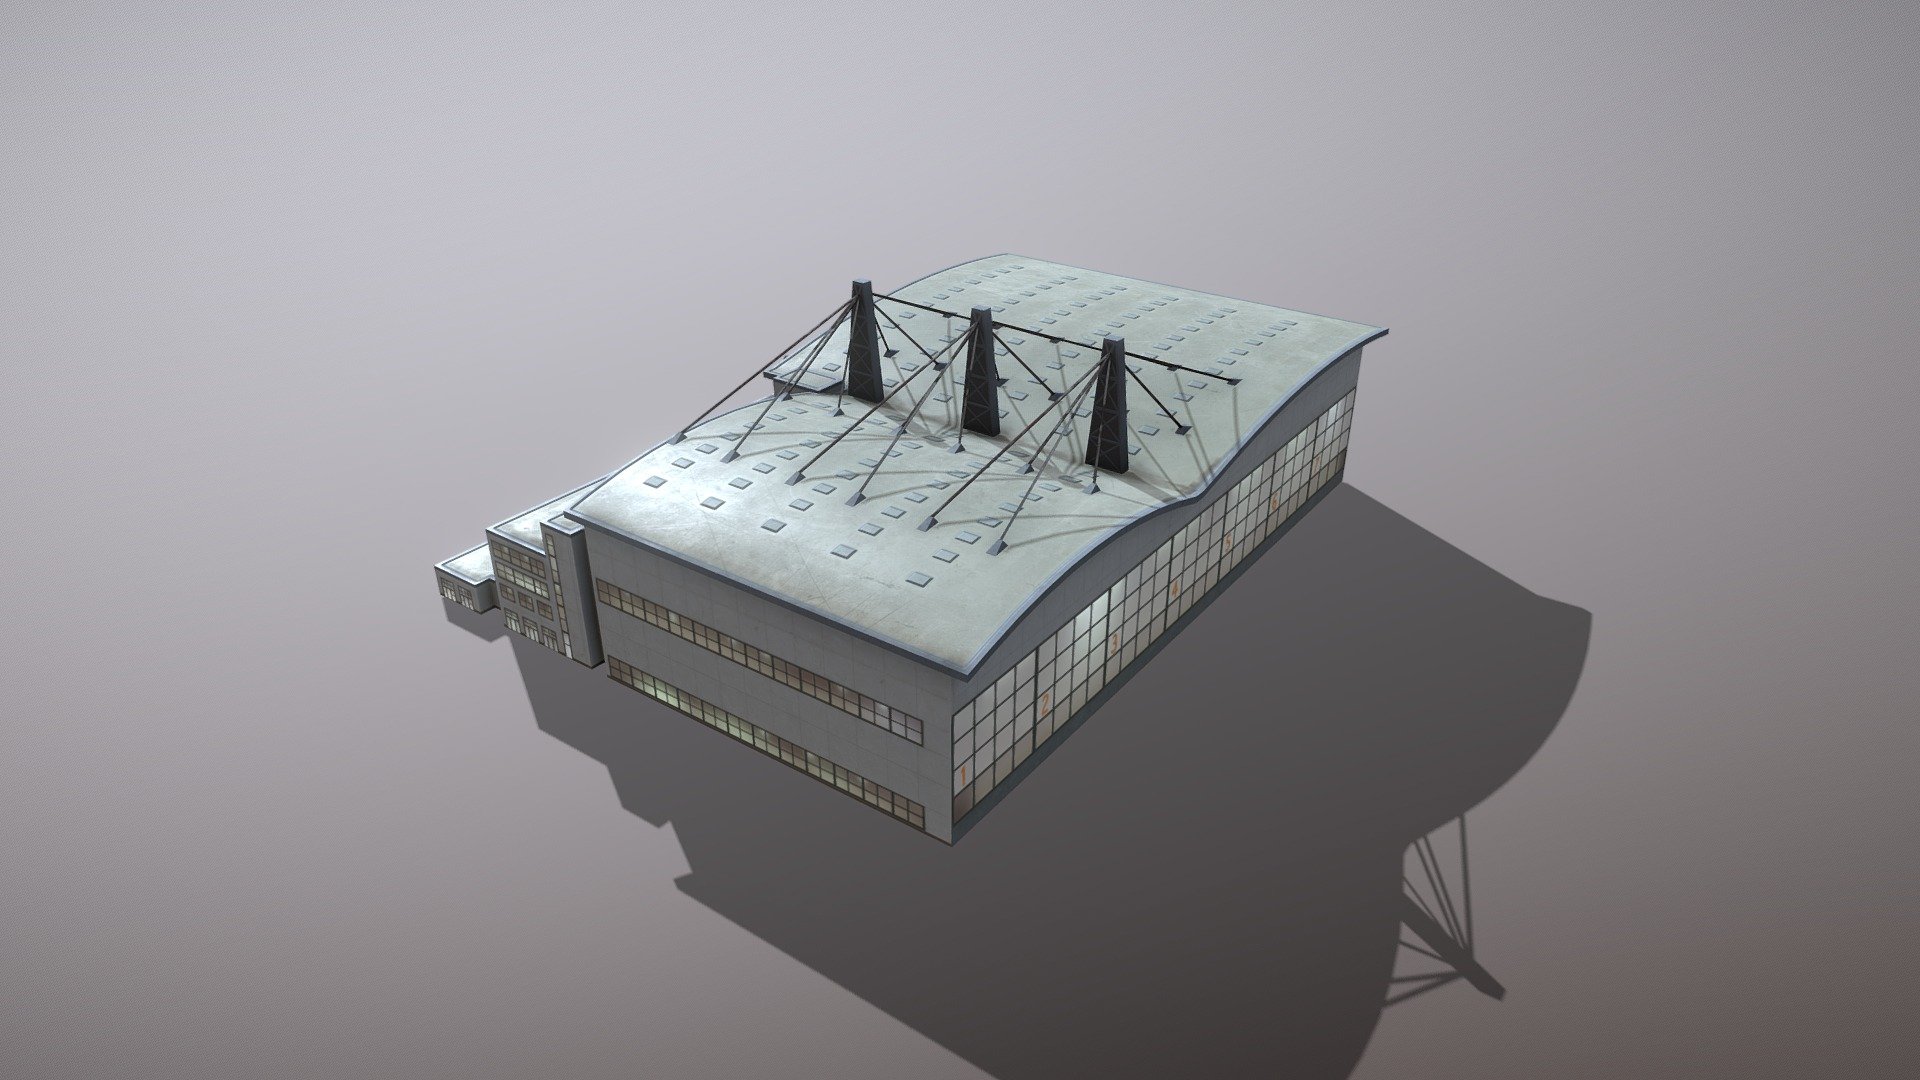 Airport Hangar EDDH_Hangar2

LOD0 - (triangles 1002) / (points 1002)

Low-poly 3D model Airport Hangar




Textures for PBR shader (Albedo, Specular, Gloss, AmbietOcclusion, NormalMap, Emission) they may be used with Unity3D, Unreal Engine. size 4096x4096 

Textures for SUMMER and WINTER  

Textures for NIGHT 

All pictures (previews) REALTIME rendering 

Textures: 


Pack for summer. 

EDDH_Hangar2_Albedo.png - 4096x4096

EDDH_Hangar2_AmbientOcclusion.png - 4096x4096

EDDH_Hangar2_NormalMap.png - 4096x4096

EDDH_Hangar2_Gloss.png - 4096x4096

EDDH_Hangar2_Specular.png - 4096x4096

EDDH_Hangar2_Emission.png - 4096x4096 (Night)



Pack for winter.      



If you have questions about my models or need any kind of help, feel free to contact me and i'll do my best to help you 3d model